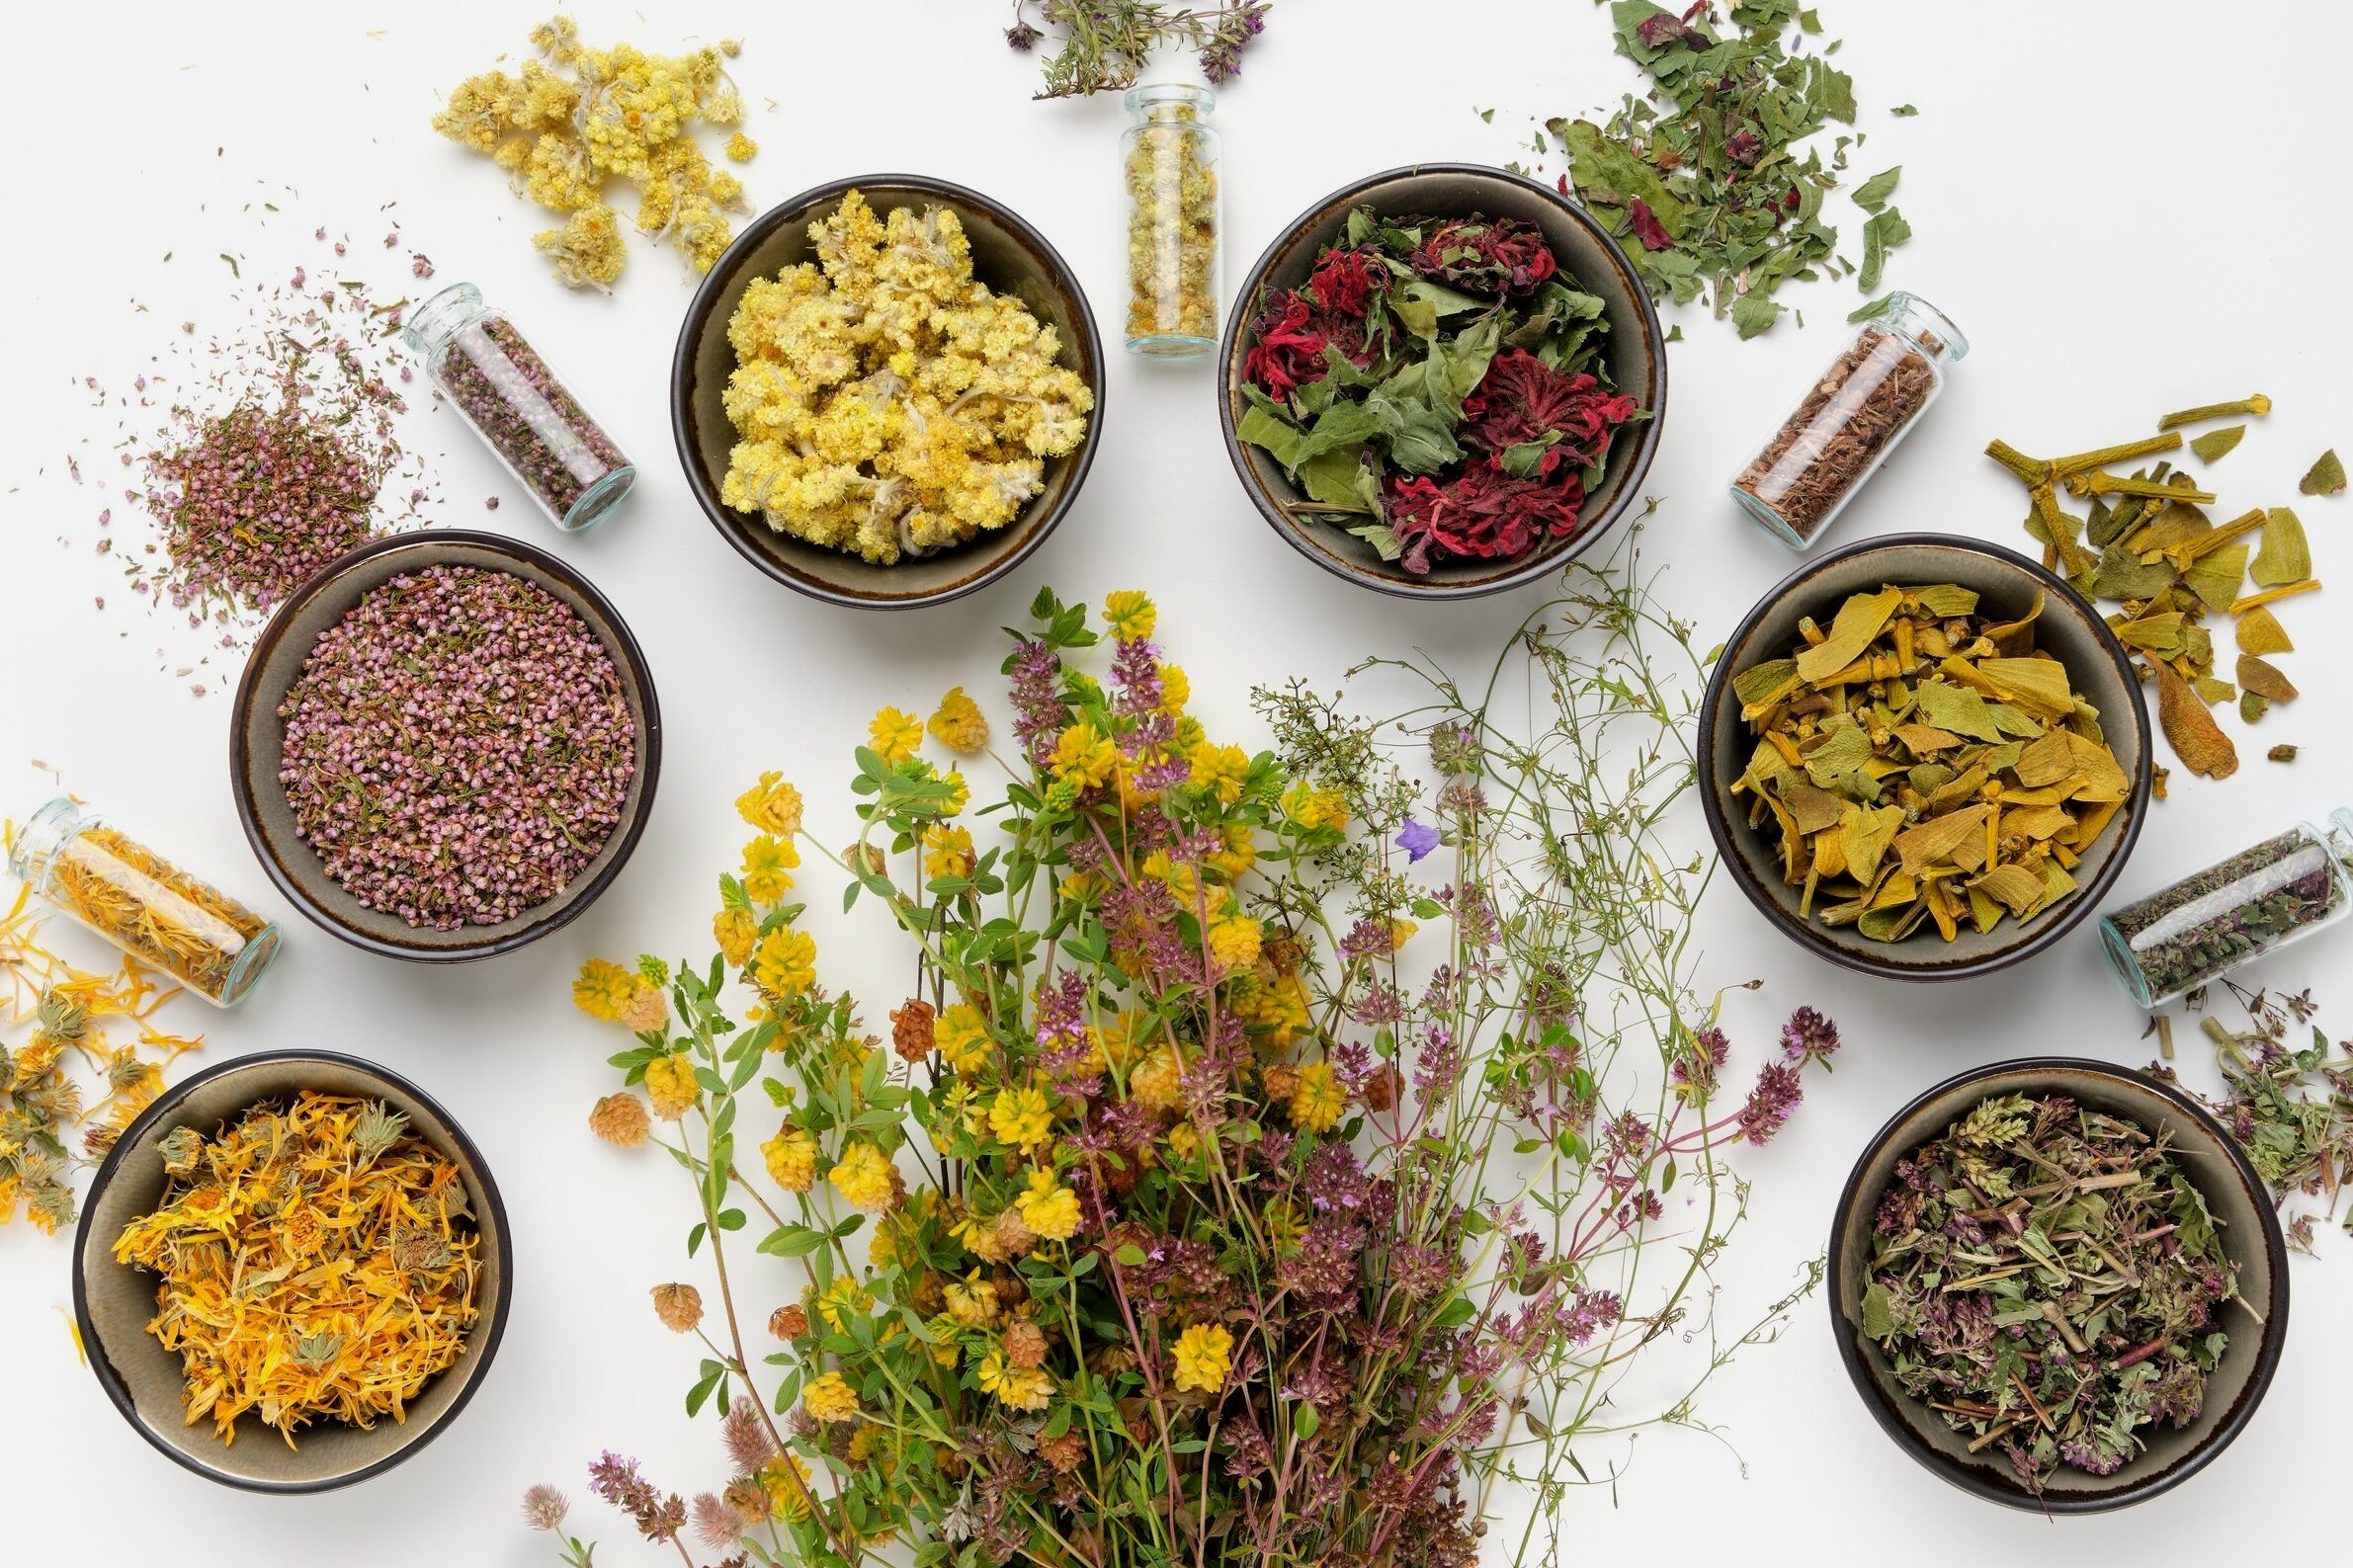 Growing Herbs 101: Tips for Cultivating Your Own Herbal Garden